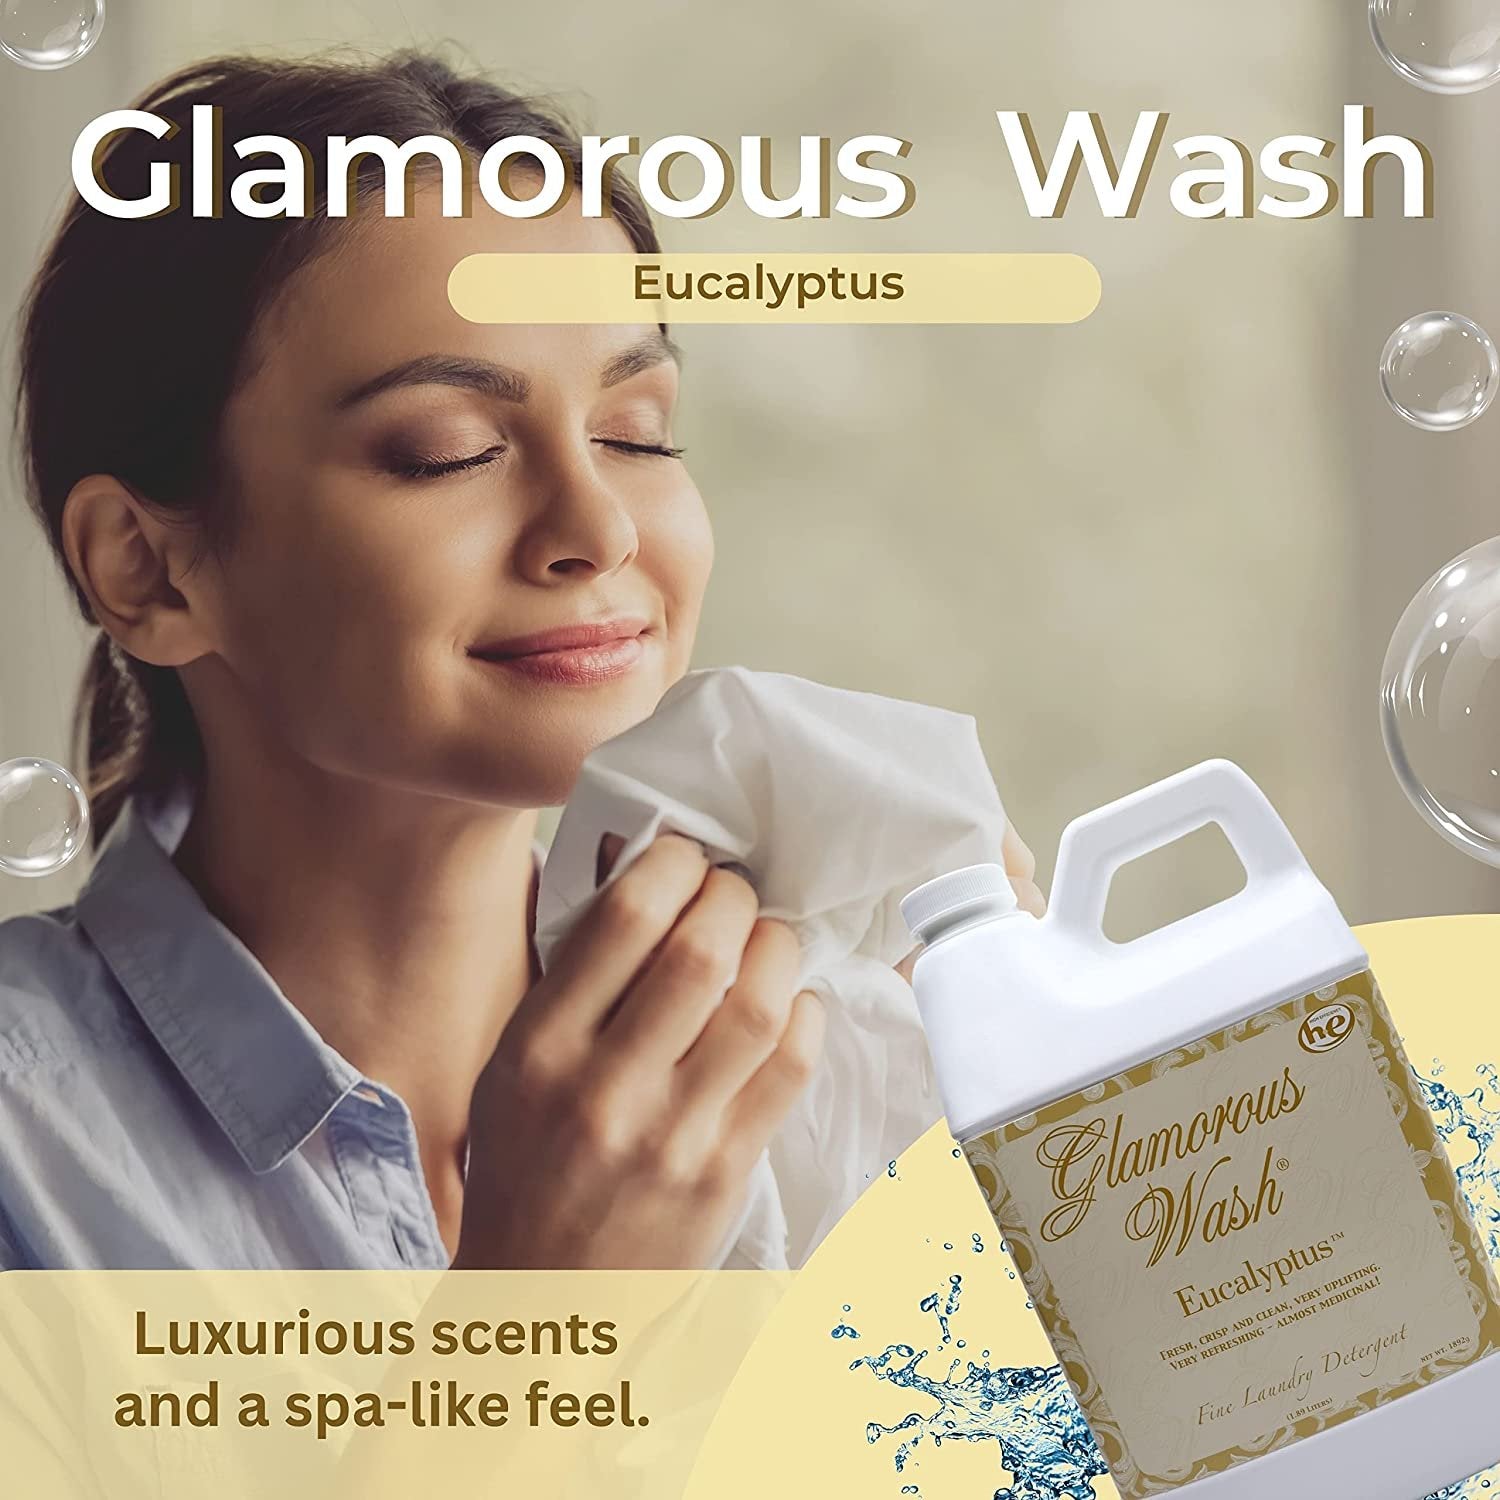 Tyler Candle Company Glamorous Wash Eucalyptus Scent Fine Laundry Liquid Detergent - Liquid Laundry Detergent for Clothing - Hand and Machine Washable - 1.89L (64 Fl Oz) Container with Bonus Key Chain